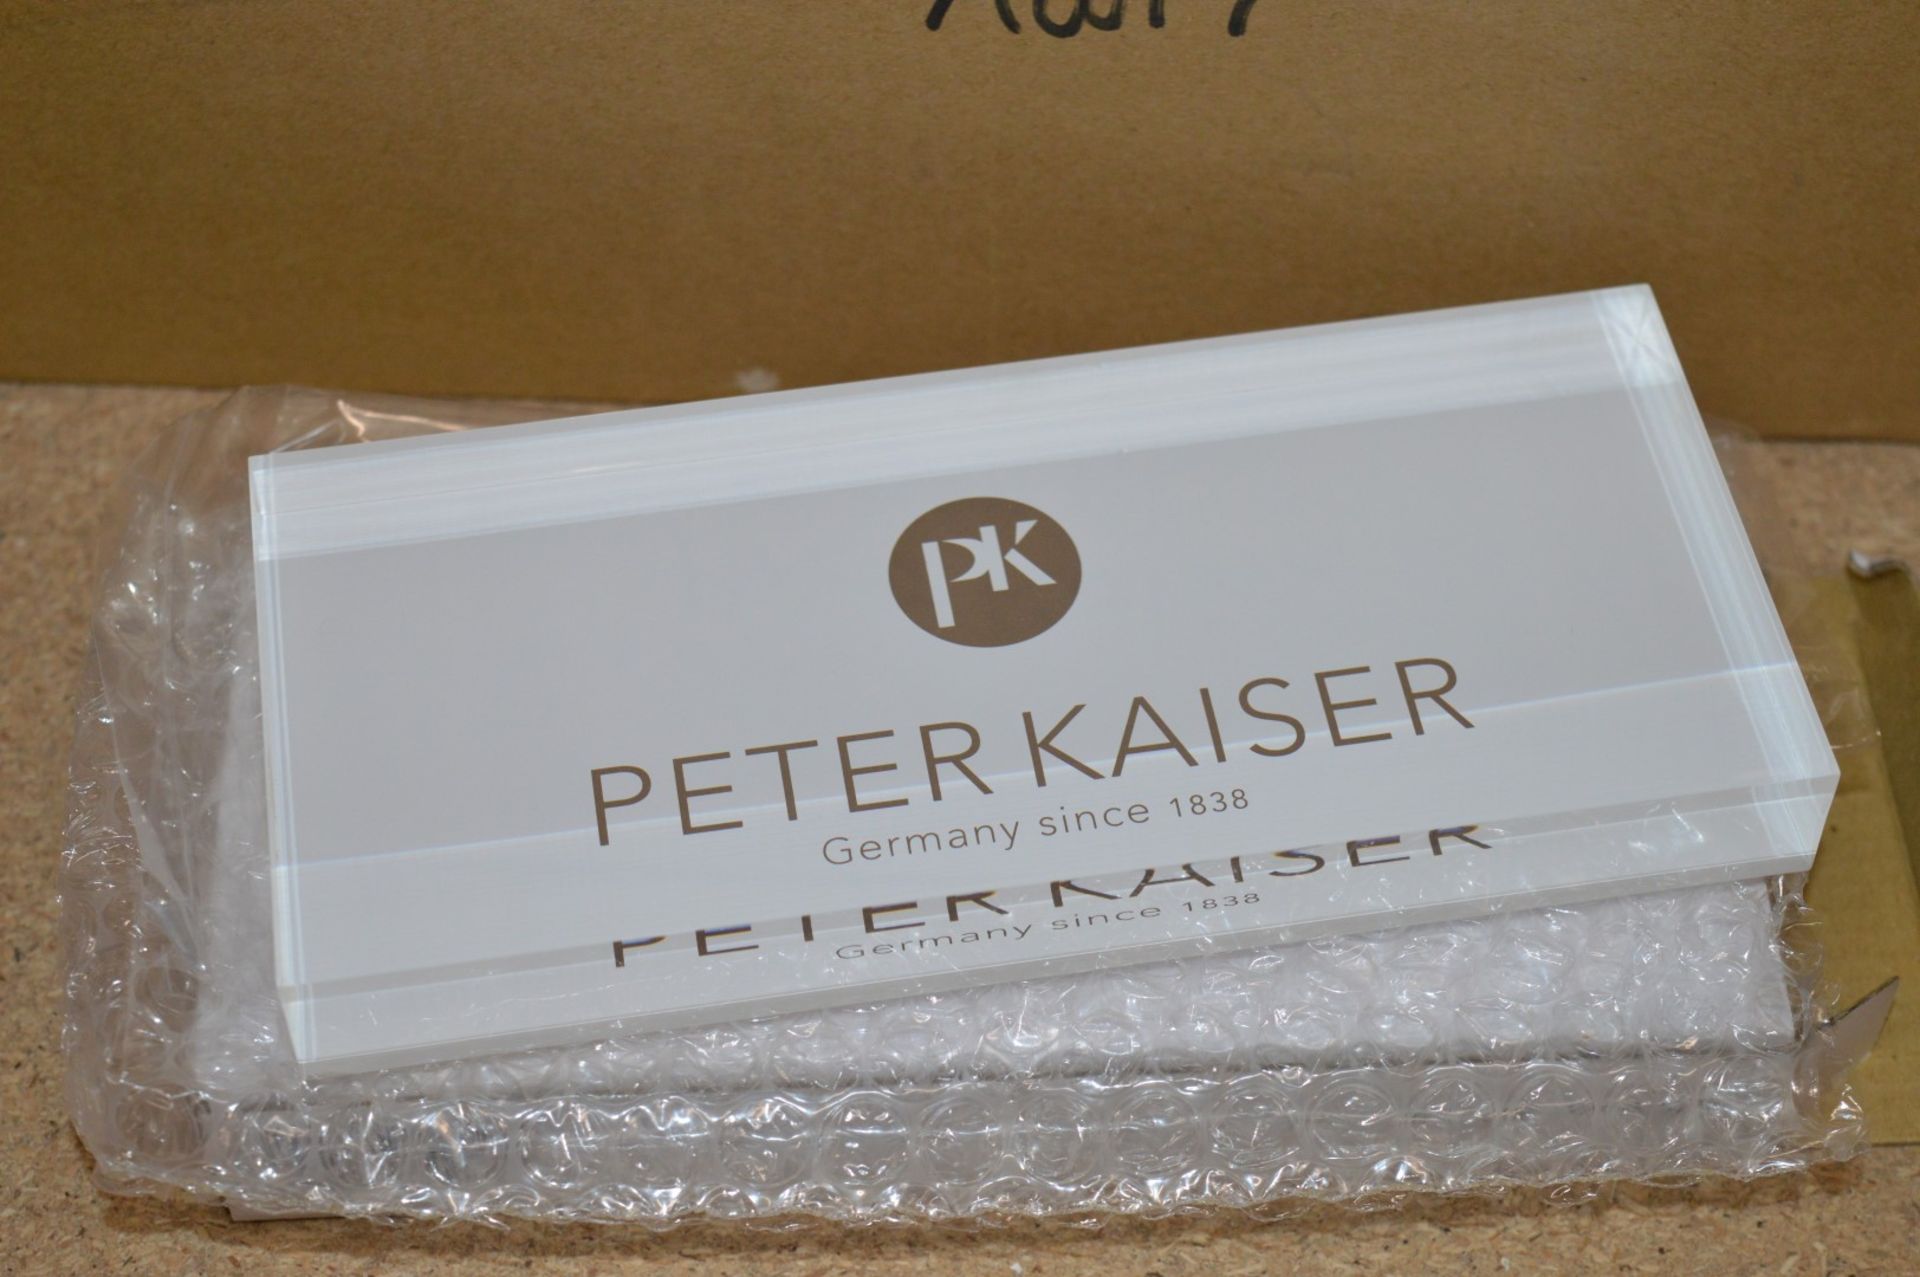 11 x Peter Kaiser Fashion Advertisement Acrylic Blocks - 18 x 11 cms - New and Boxed - CL285 - Ref - Image 3 of 3